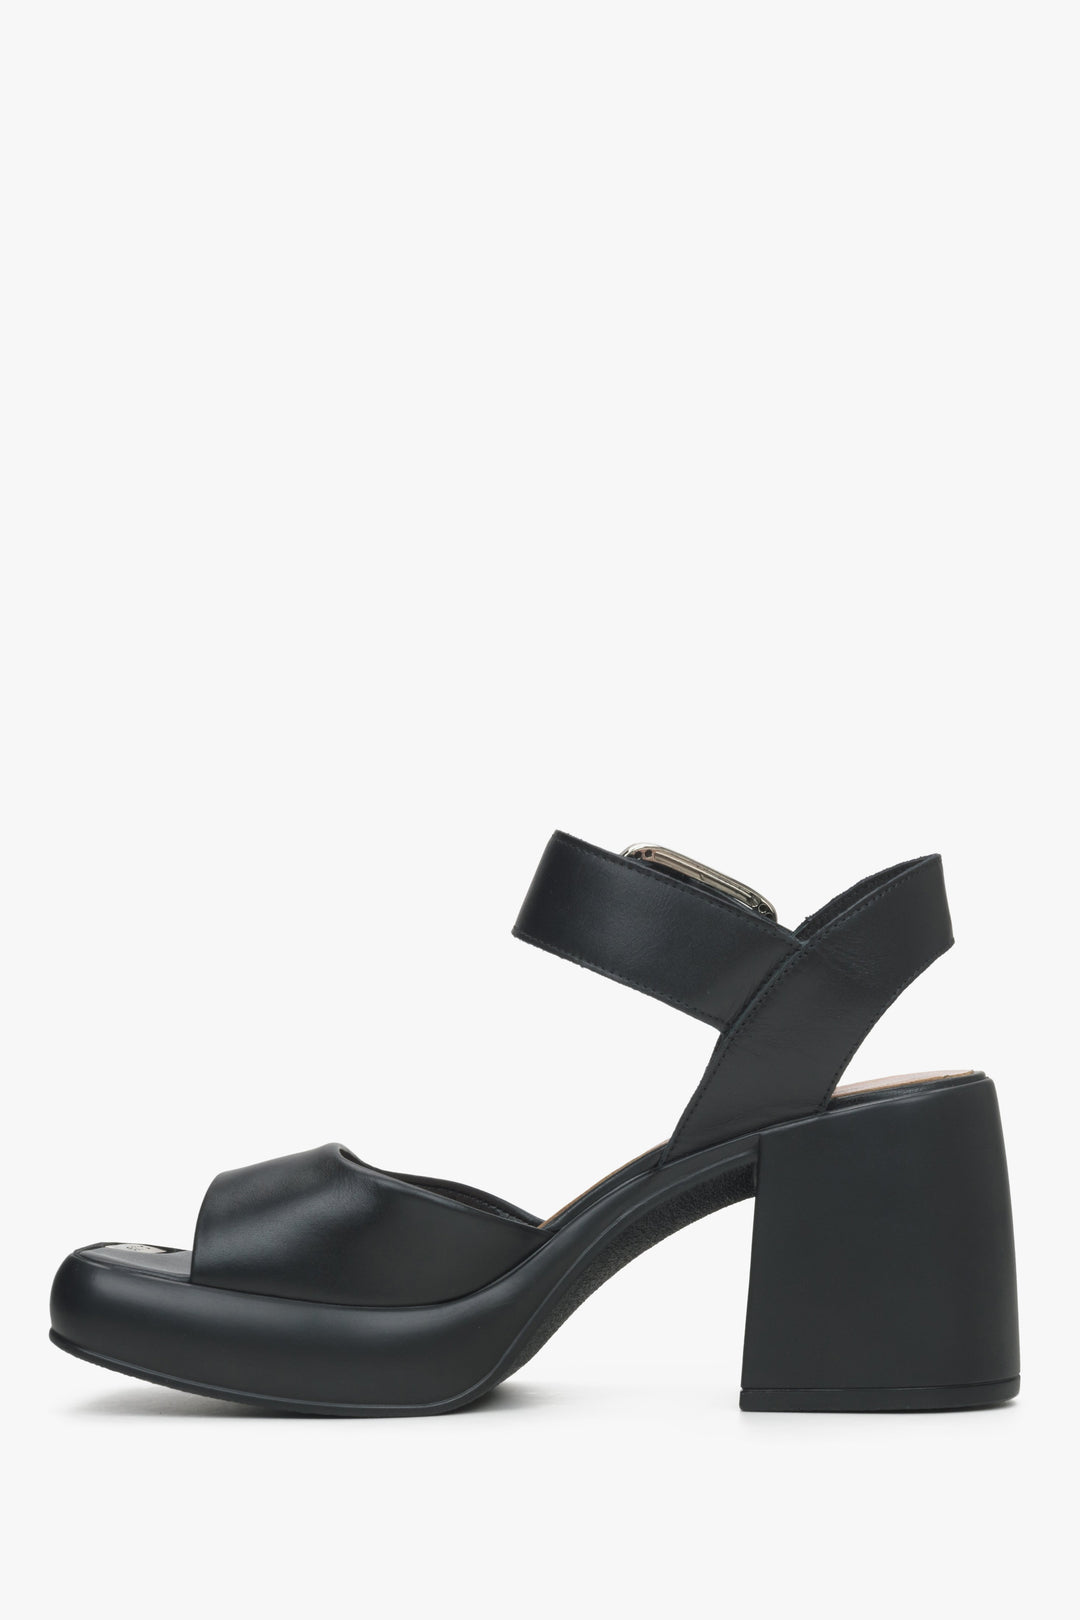 Stylish women's black sandals with a stable block heel by Estro - shoe profile.